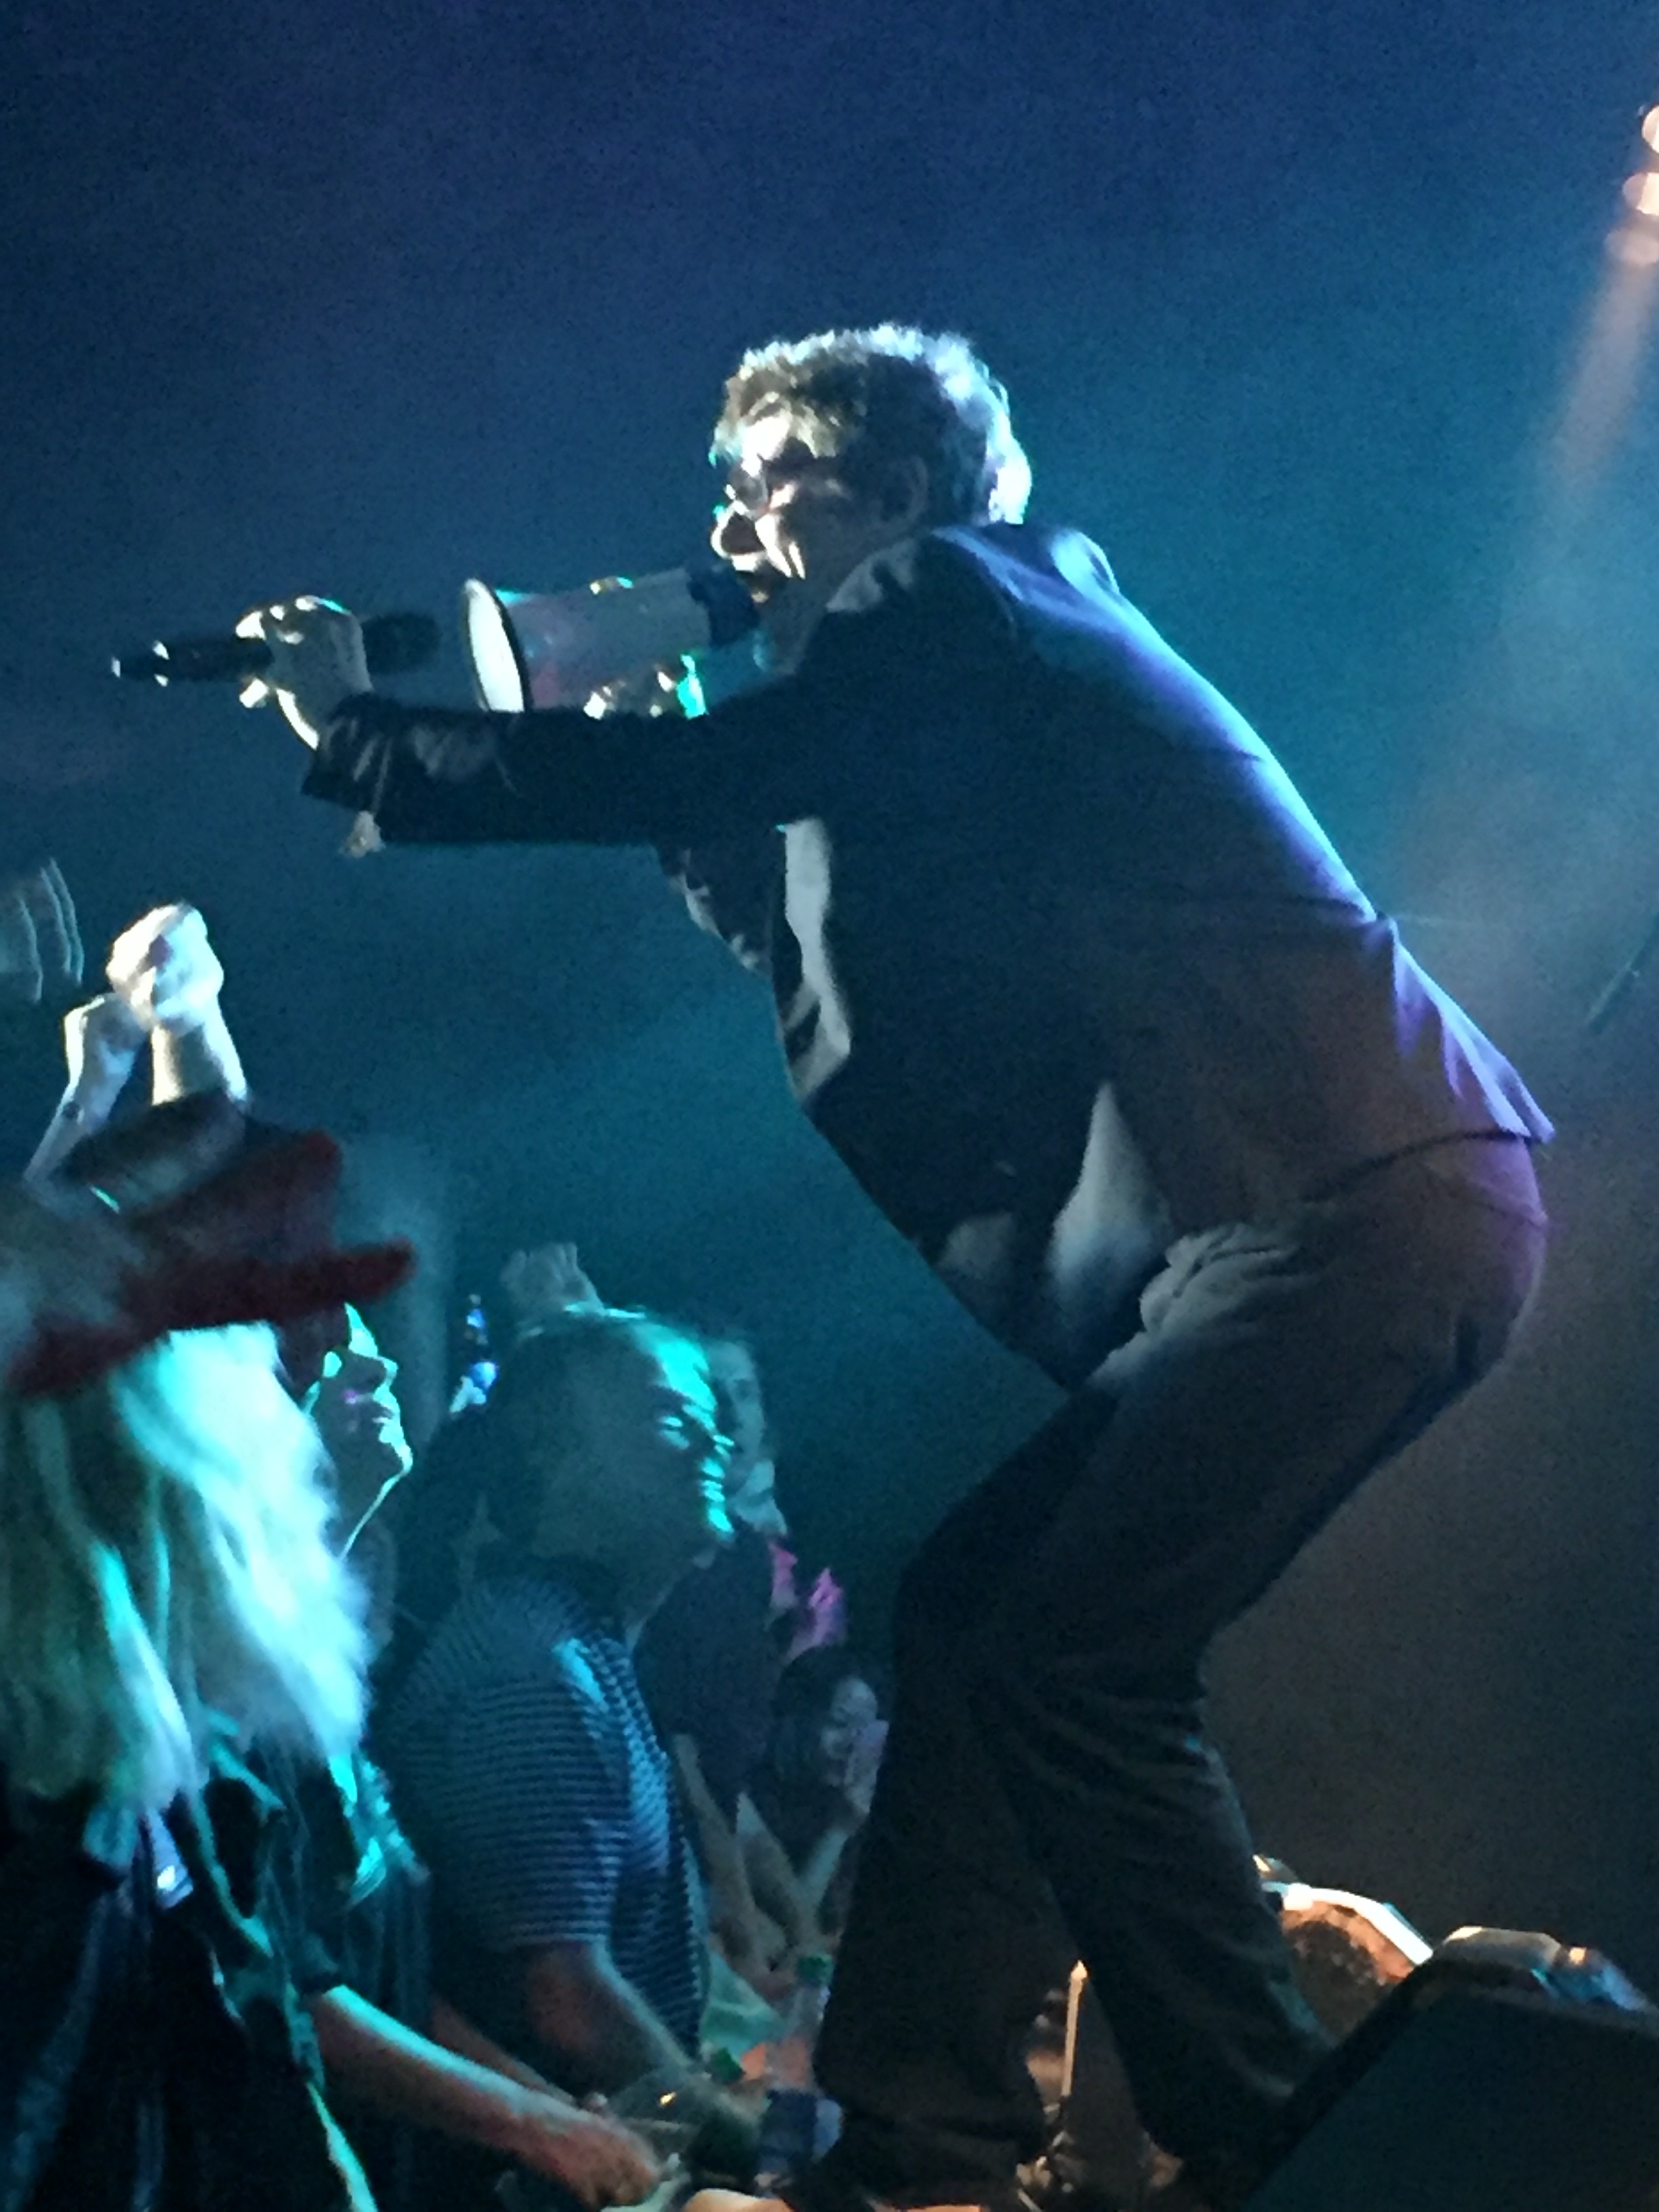 PHOTOS & REVIEW: The Psychedelic Furs & Robyn Hitchcock @ The Commodore Ballroom |JR ...2448 x 3264